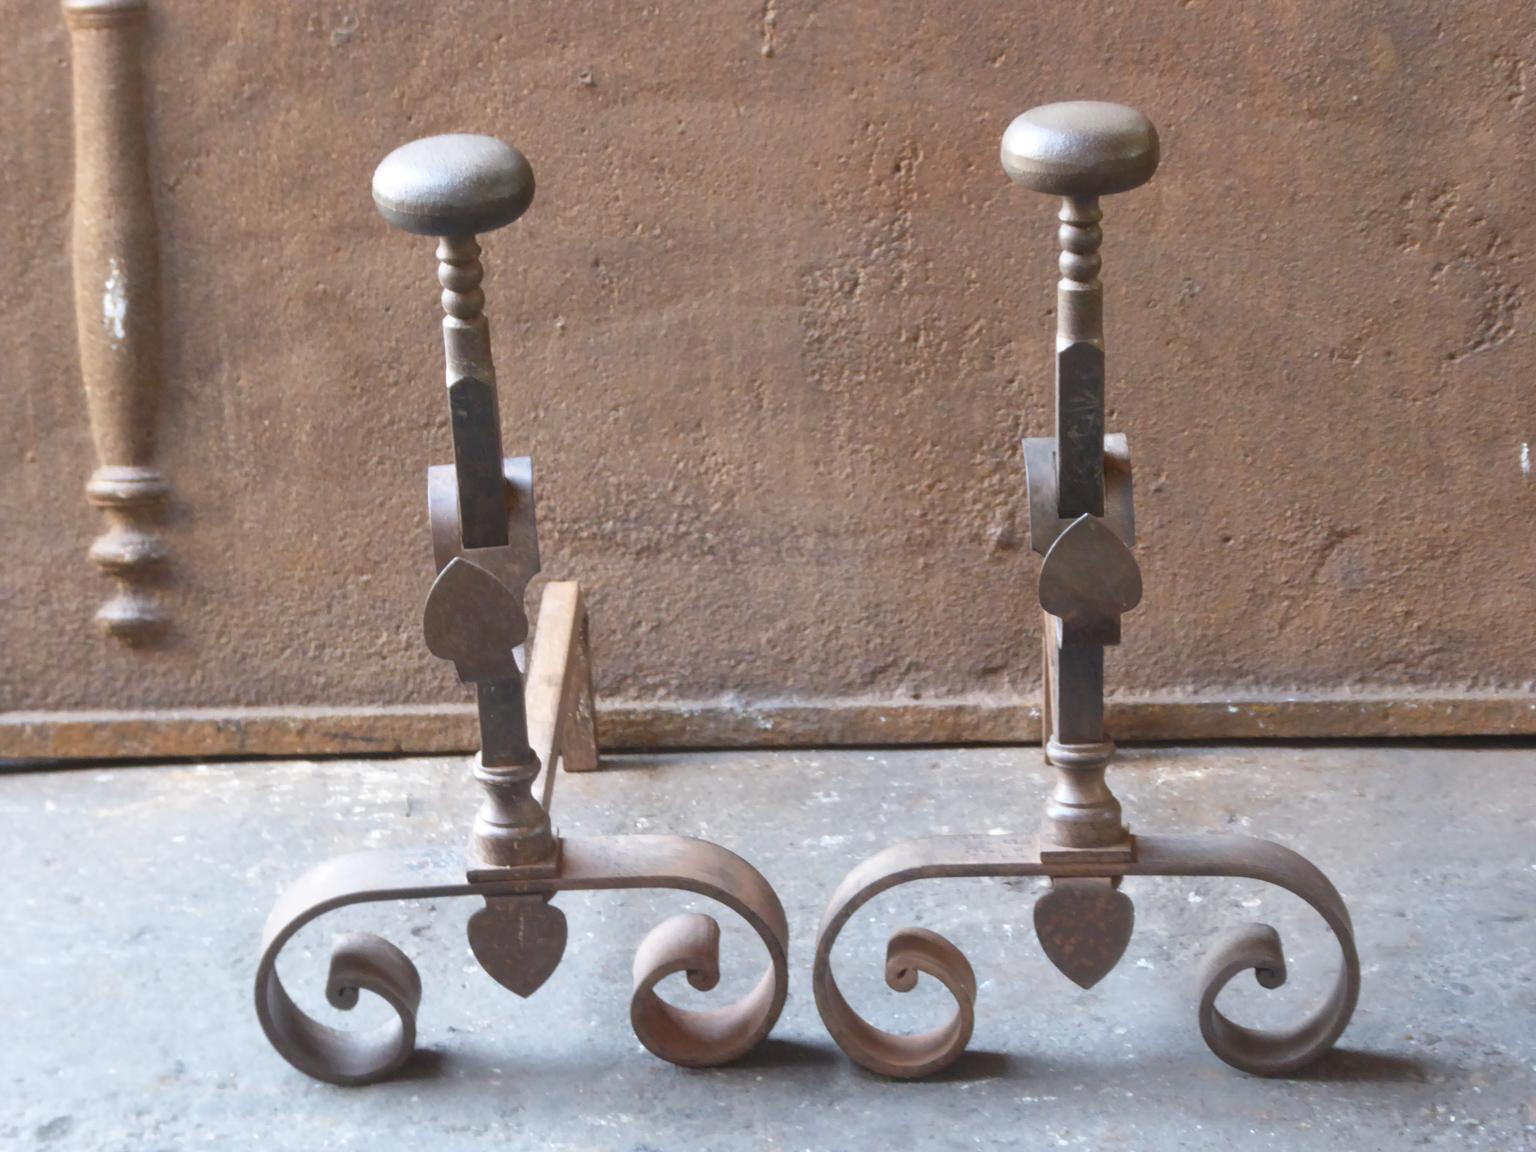 19th century French Napoleon III andirons made of hand forged wrought iron. The andirons have spit hooks to grill food. They are in a good condition.